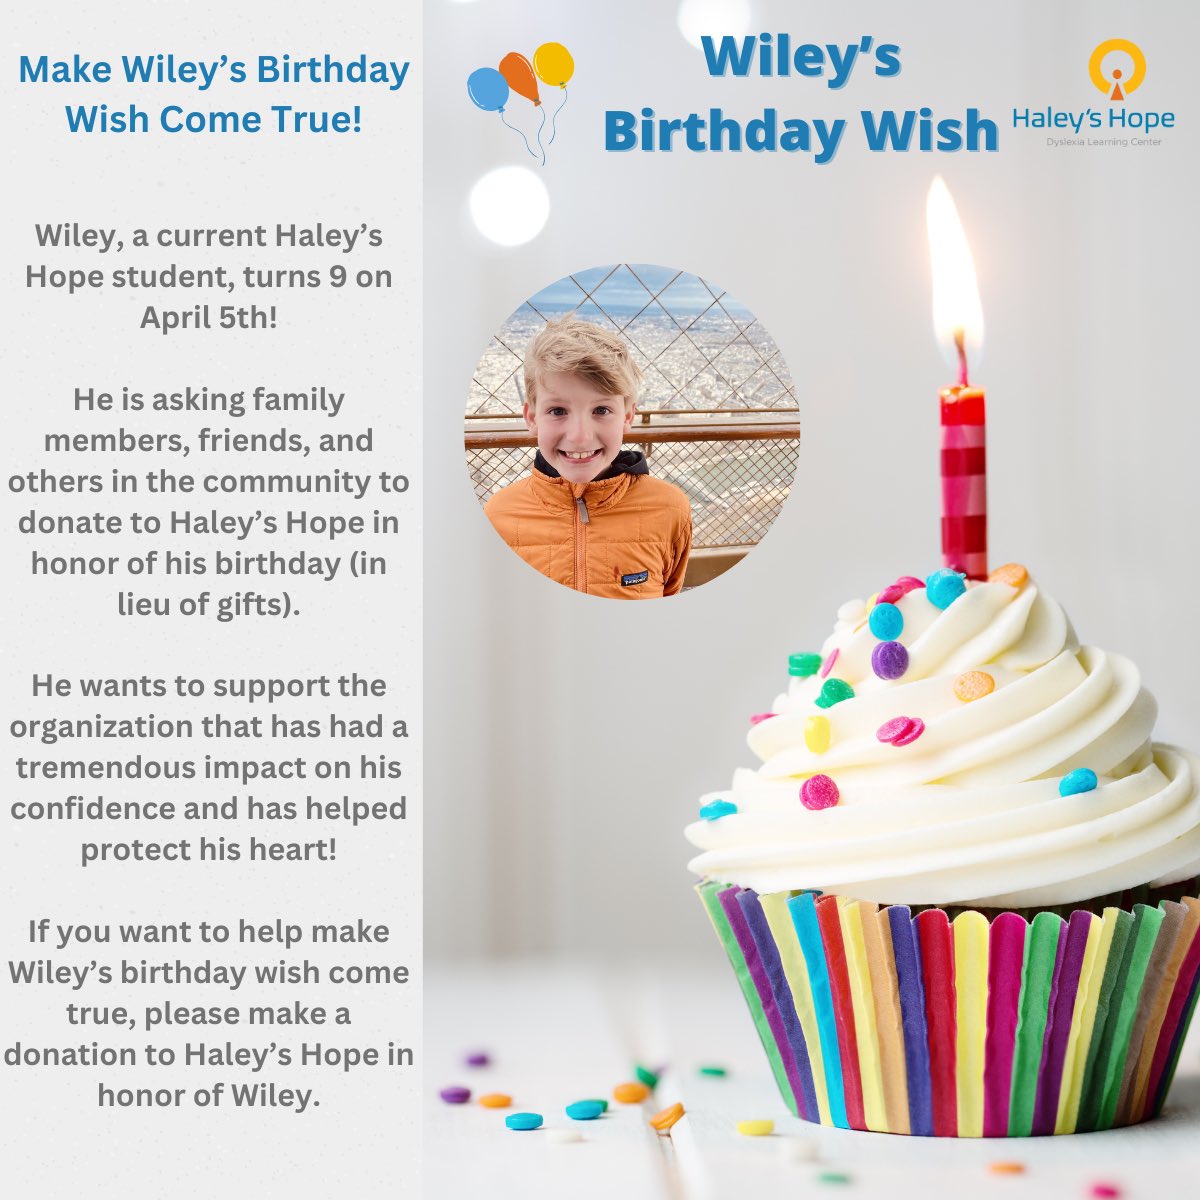 My son is doing something amazing - raising money for @HaleysHope dyslexia learning center for his 9th birthday! Please join us in supporting dyslexic thinkers! haleyshope.org/make-a-donation